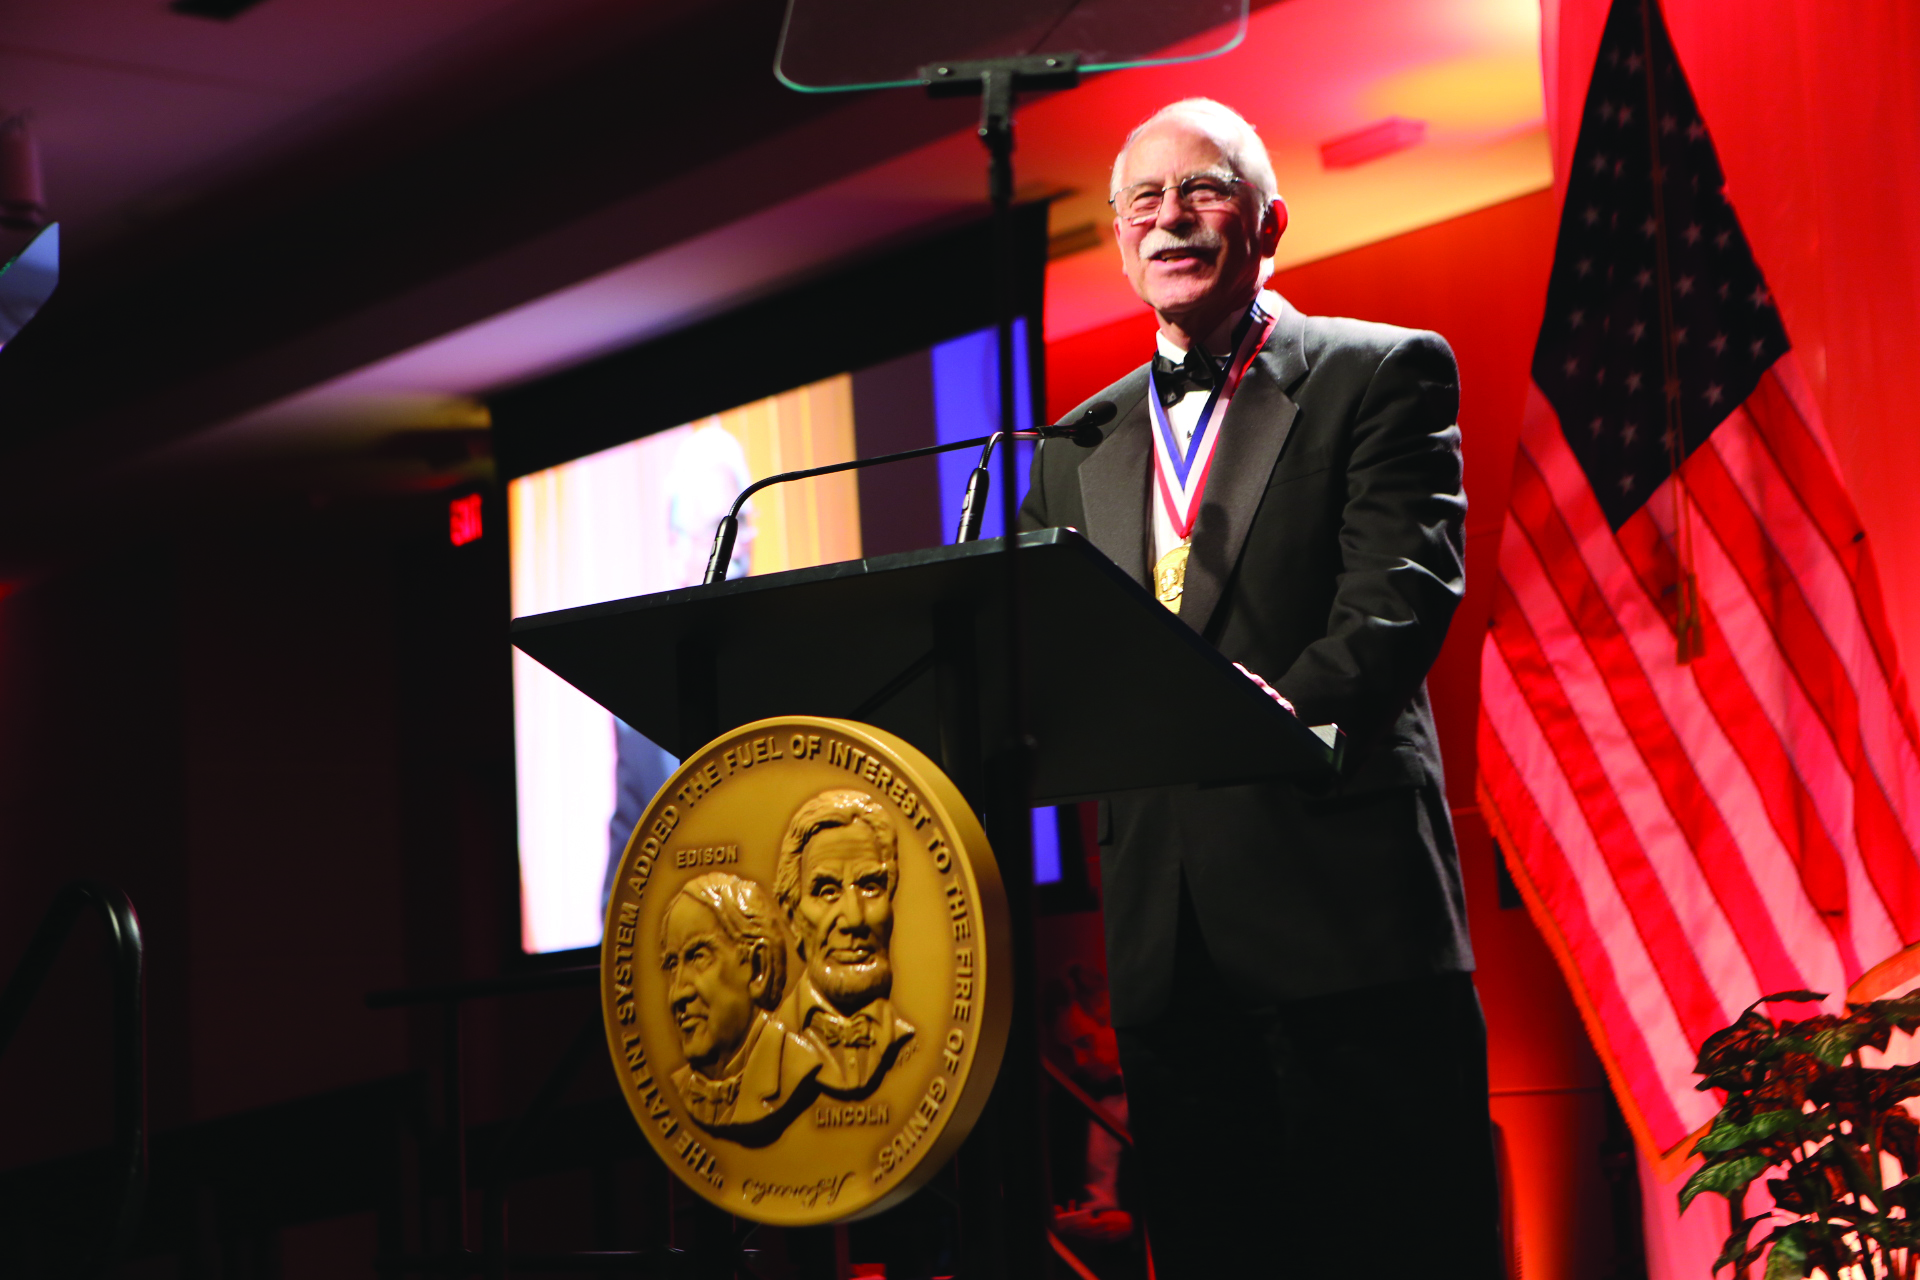 Chuck Hull 3D Systems Inventors Hall Of Fame